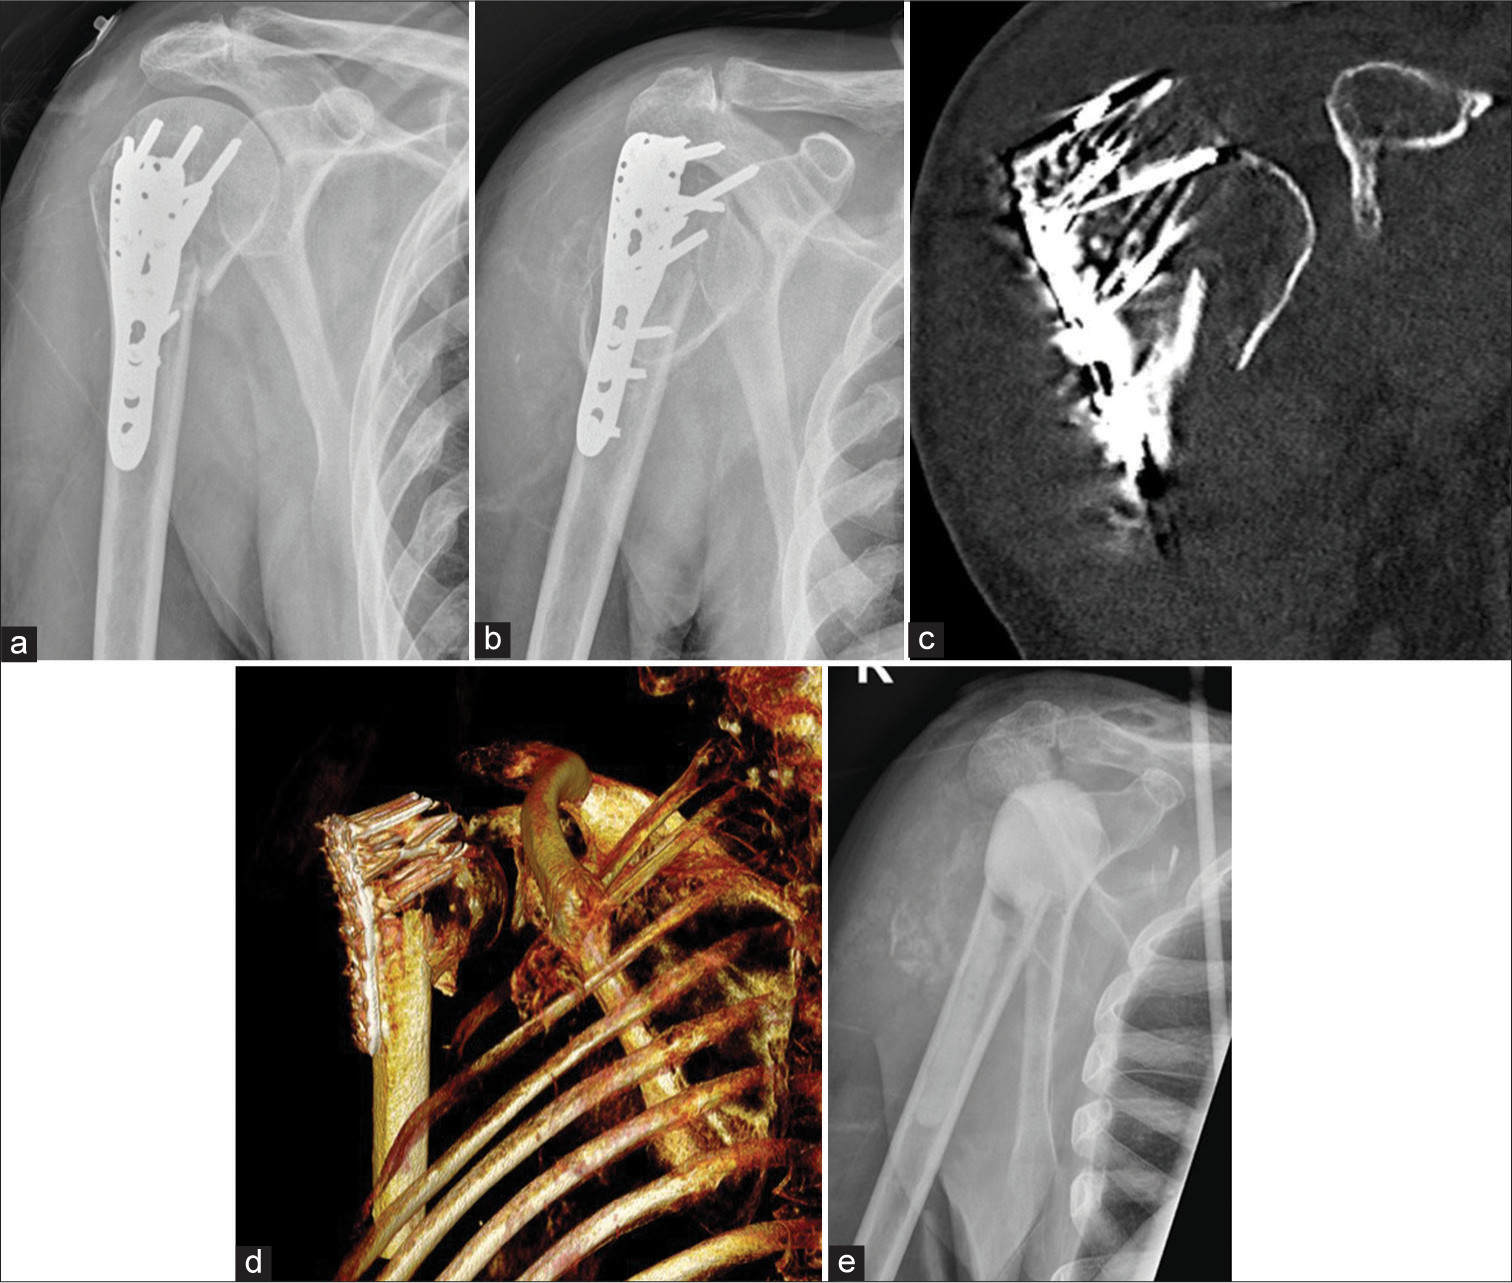 Anterior posterior radiographs of right shoulder taken 3 weeks apart (a) initial radiograph, (b) taken 3 weeks later, showing rapid destruction of the humeral head with exposed screws of the humeral internal fixation. Also note the multiple, old, rib fractures. (c and d), coronal and volume rendered CT images show exposed metal work and attenuation of the humeral head. (e) Post-operative Y view showing removal of metalwork and cement placement as a part of two stage replacement. (Image Courtesy Dr Raj Chari, Consultant Musculoskeletal Radiologist, Oxford University Hospitals NHS Trust).